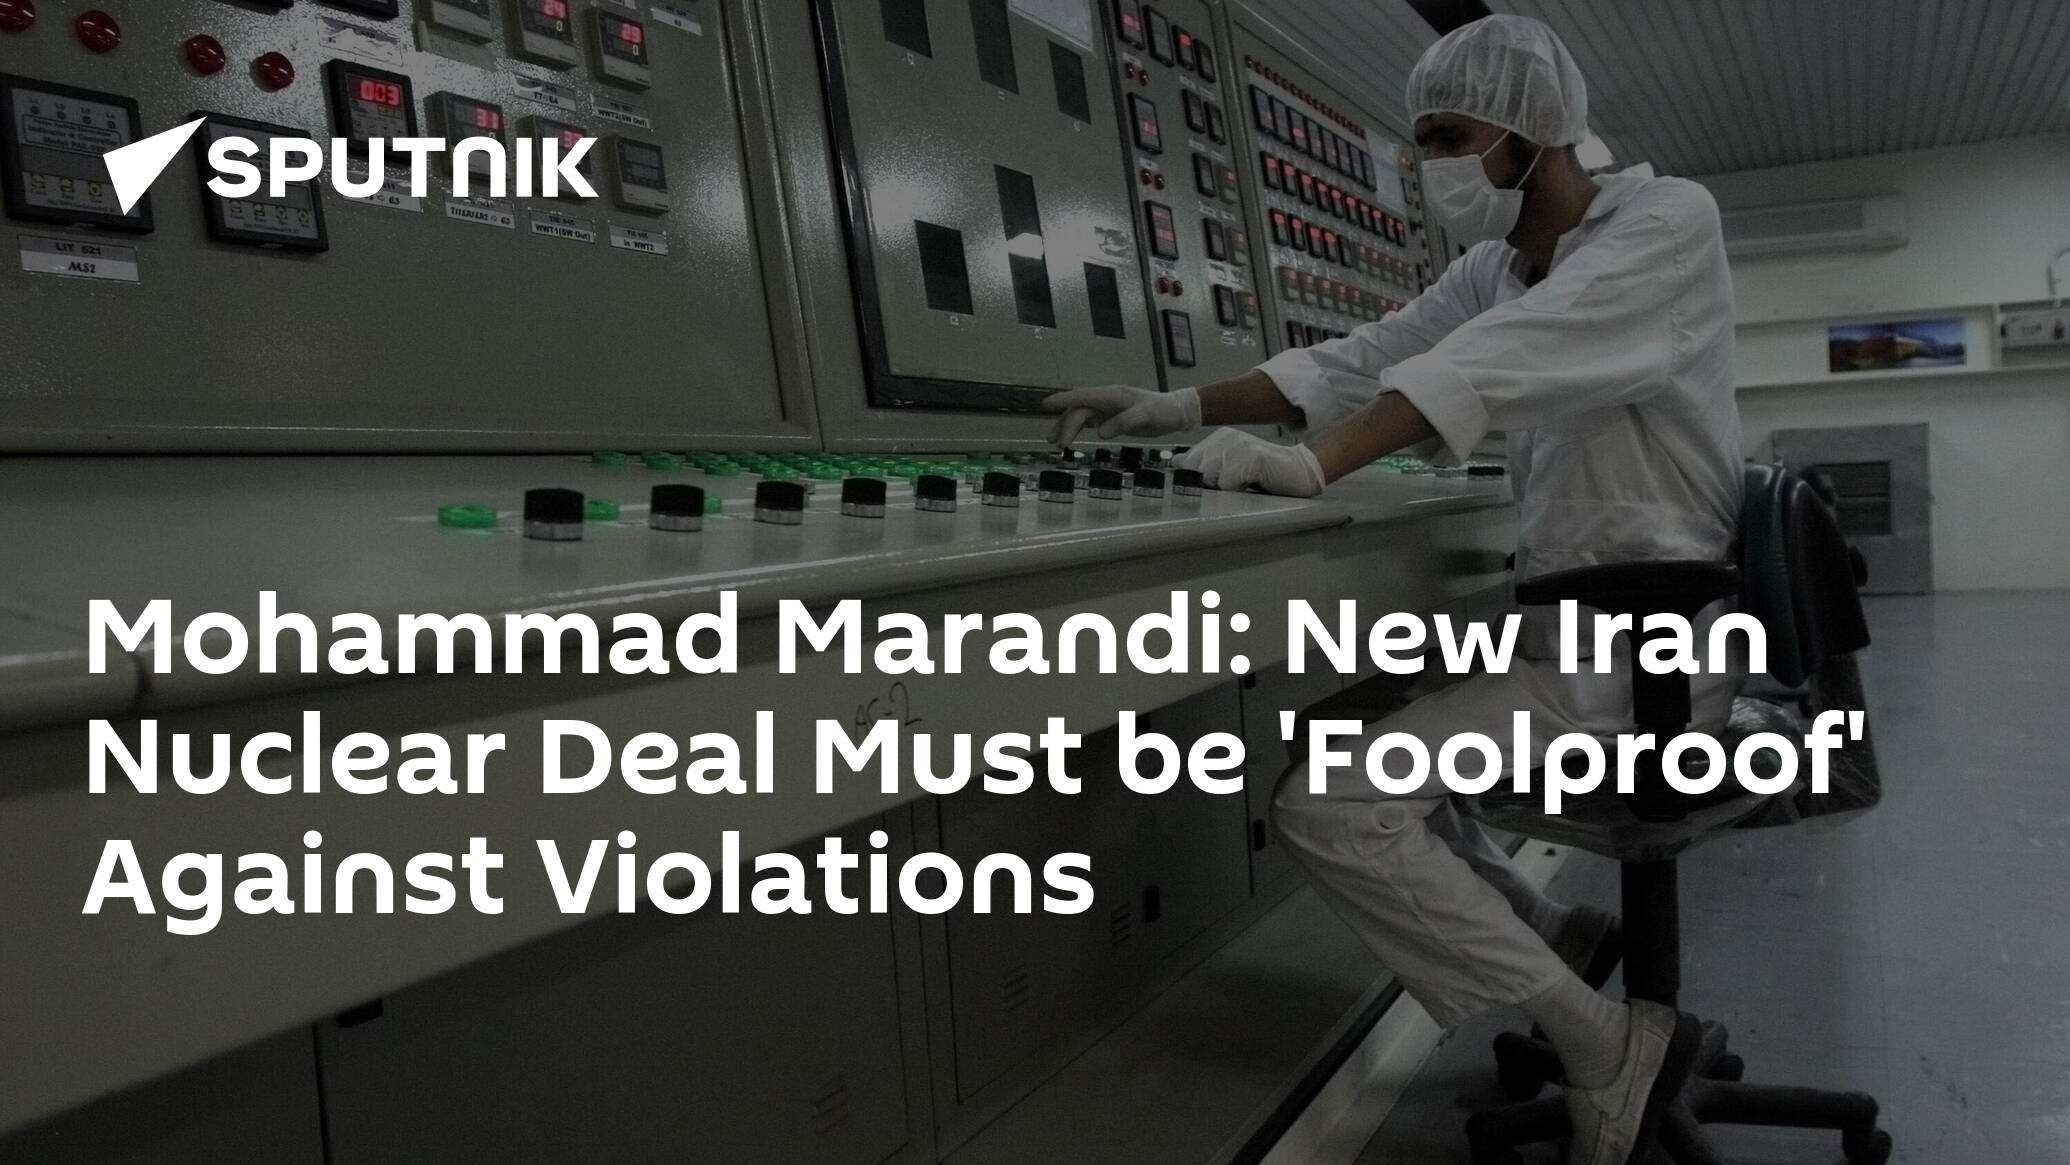 Mohammad Marandi: New Iran Nuclear Deal Must be 'Foolproof' Against Violations